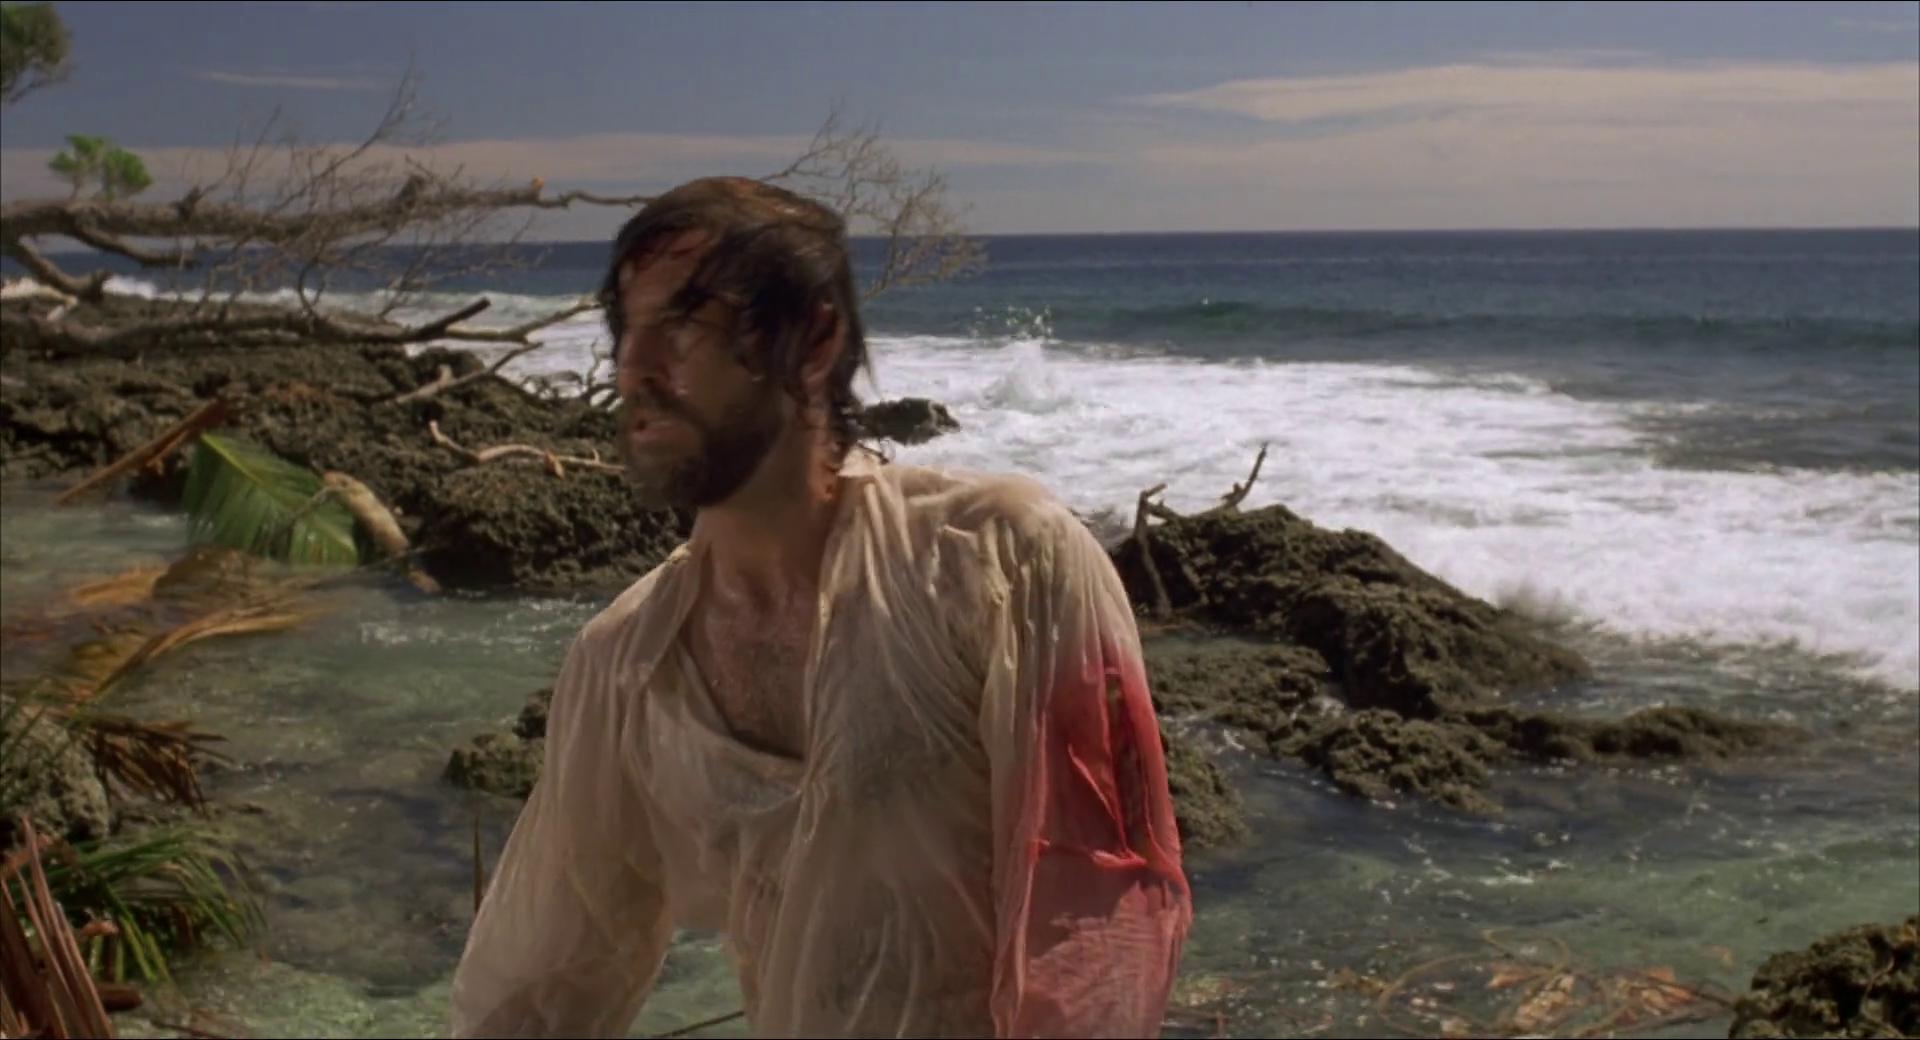 A film still from the 1997 adaptation of Robinson Crusoe shows Crusoe freshly washed ashore after the shipwreck. He is standing on a debris-strewn beach, his white shirt-arm stained with blood.